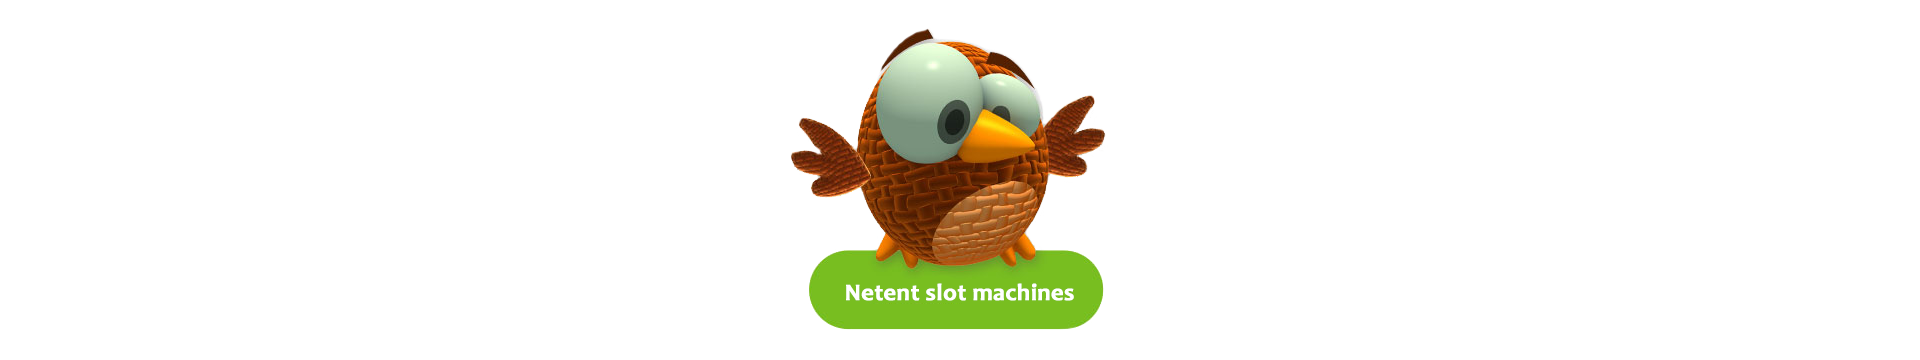 Net-Entertainment image of different slots